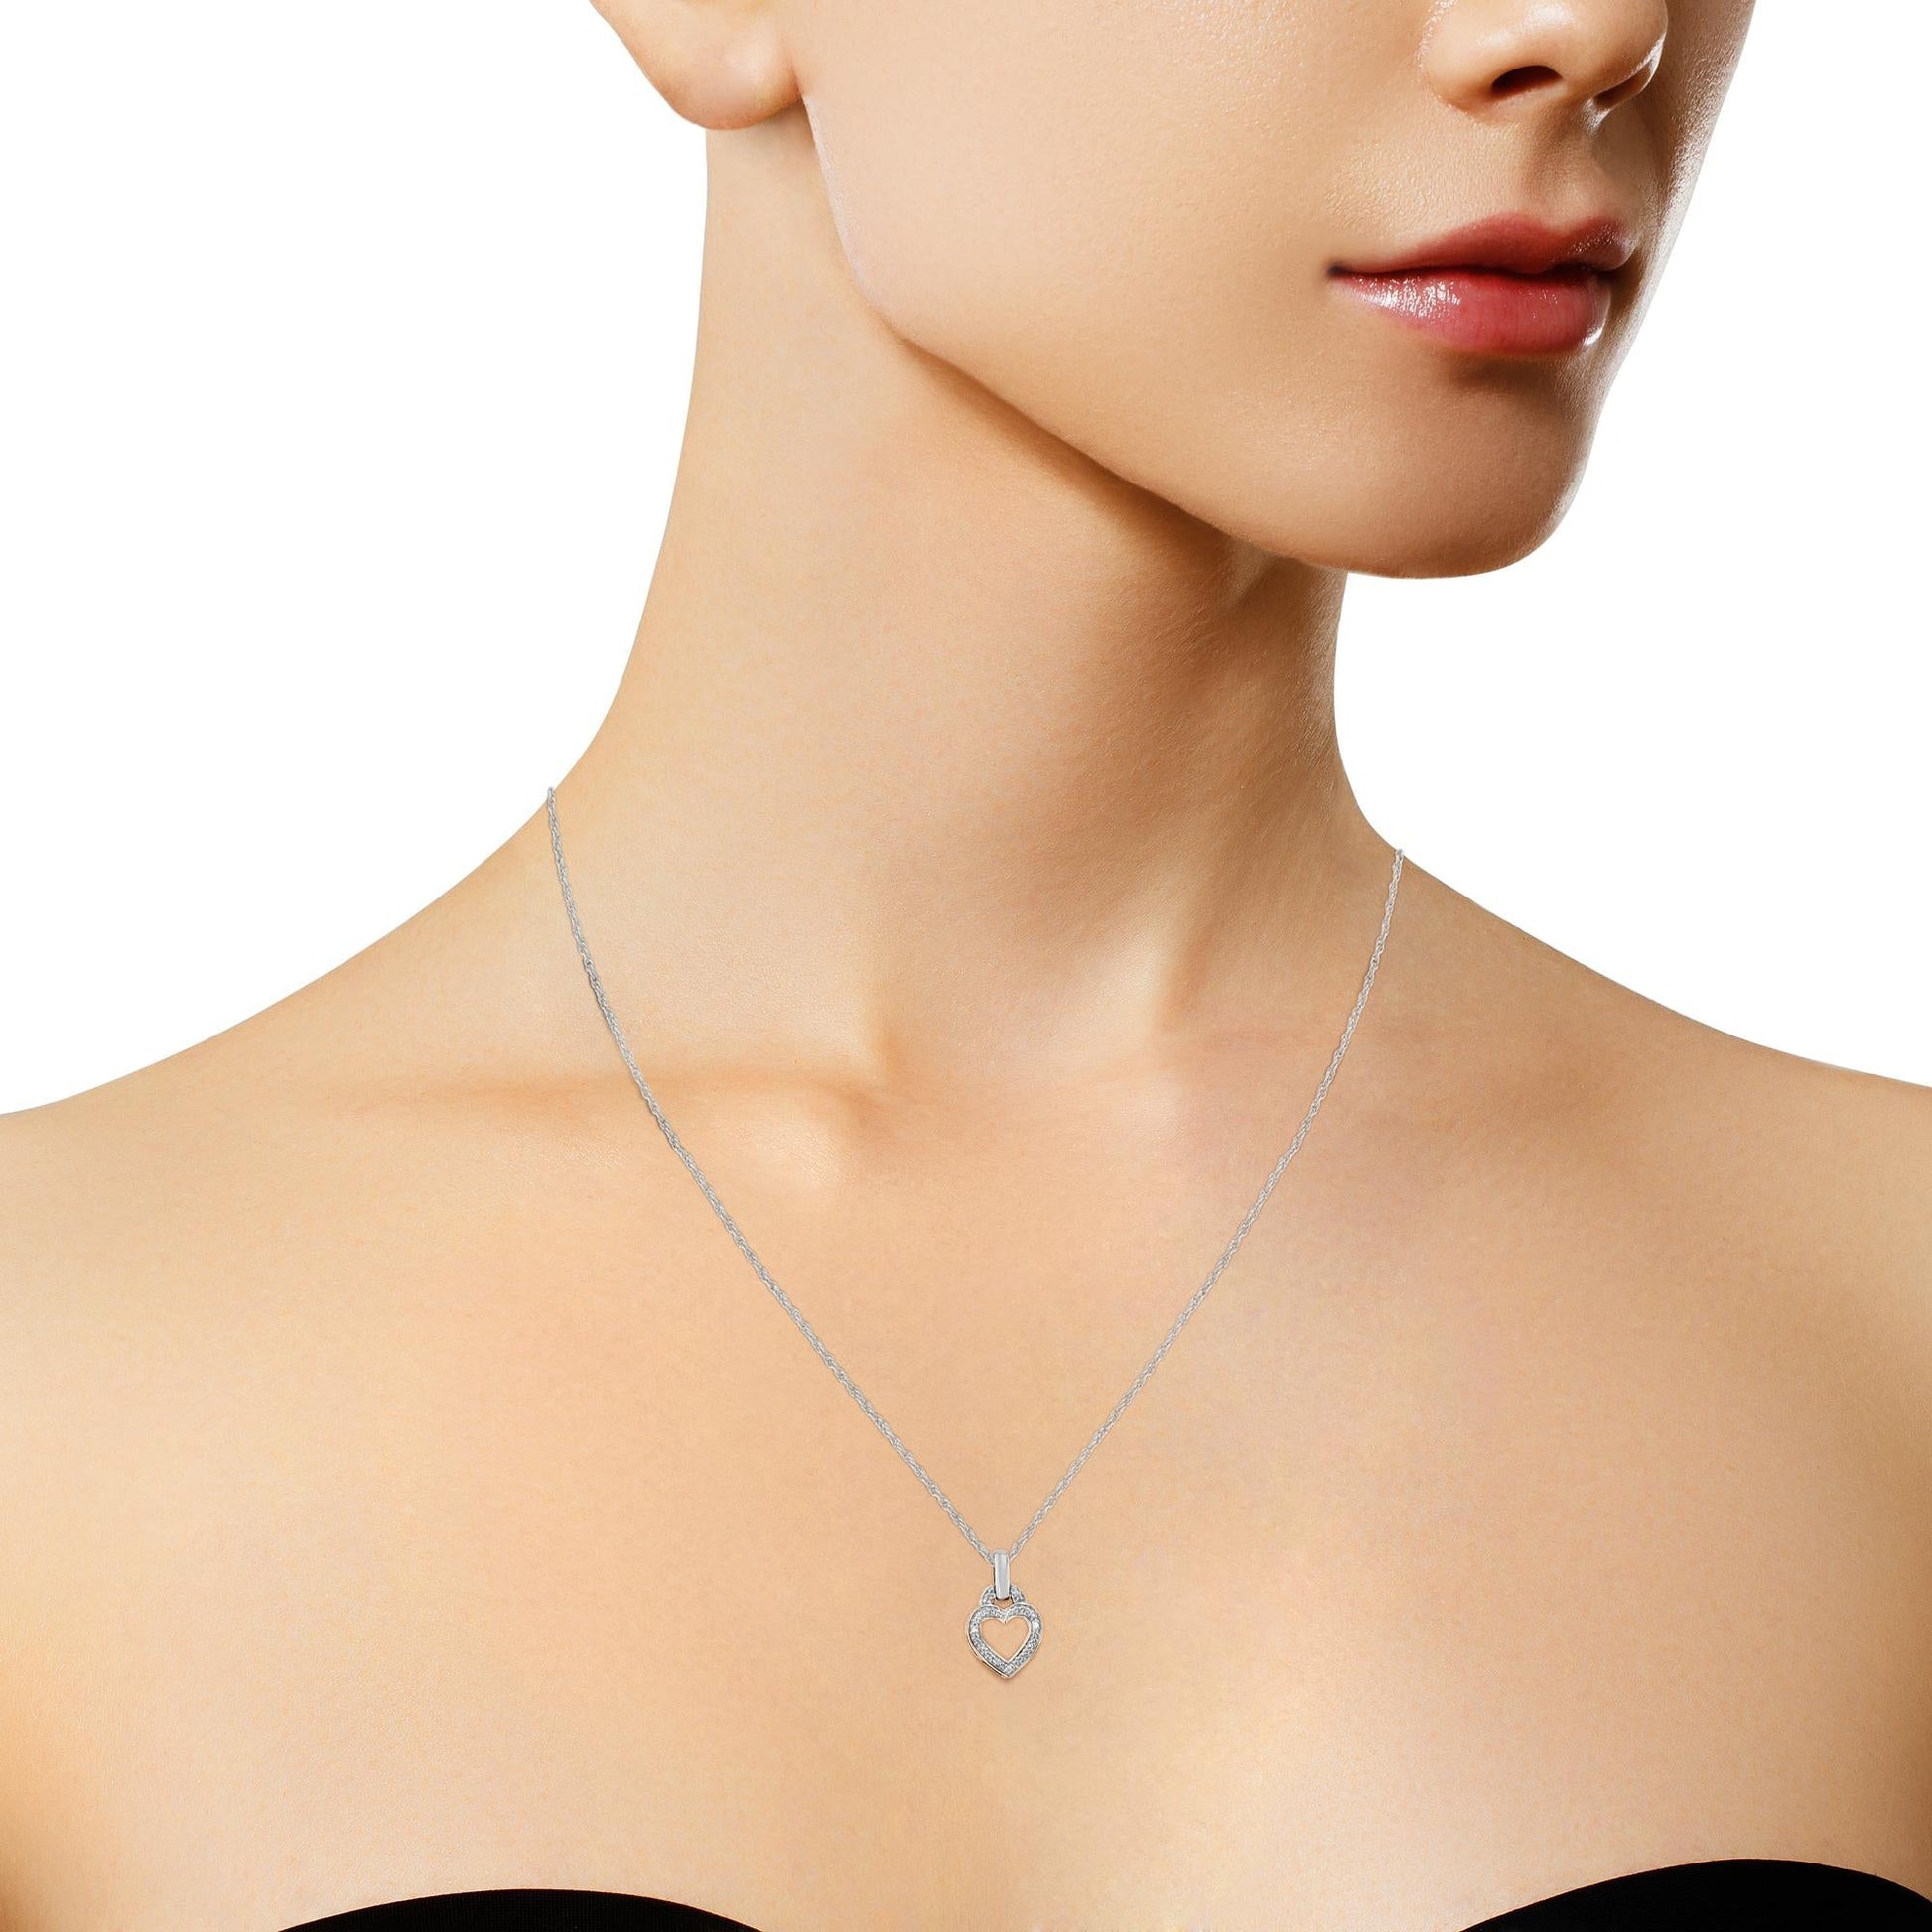 .925 Sterling Silver Heart Pendant Necklace with Diamond Accents (1/20 Cttw) - Desire & Hope